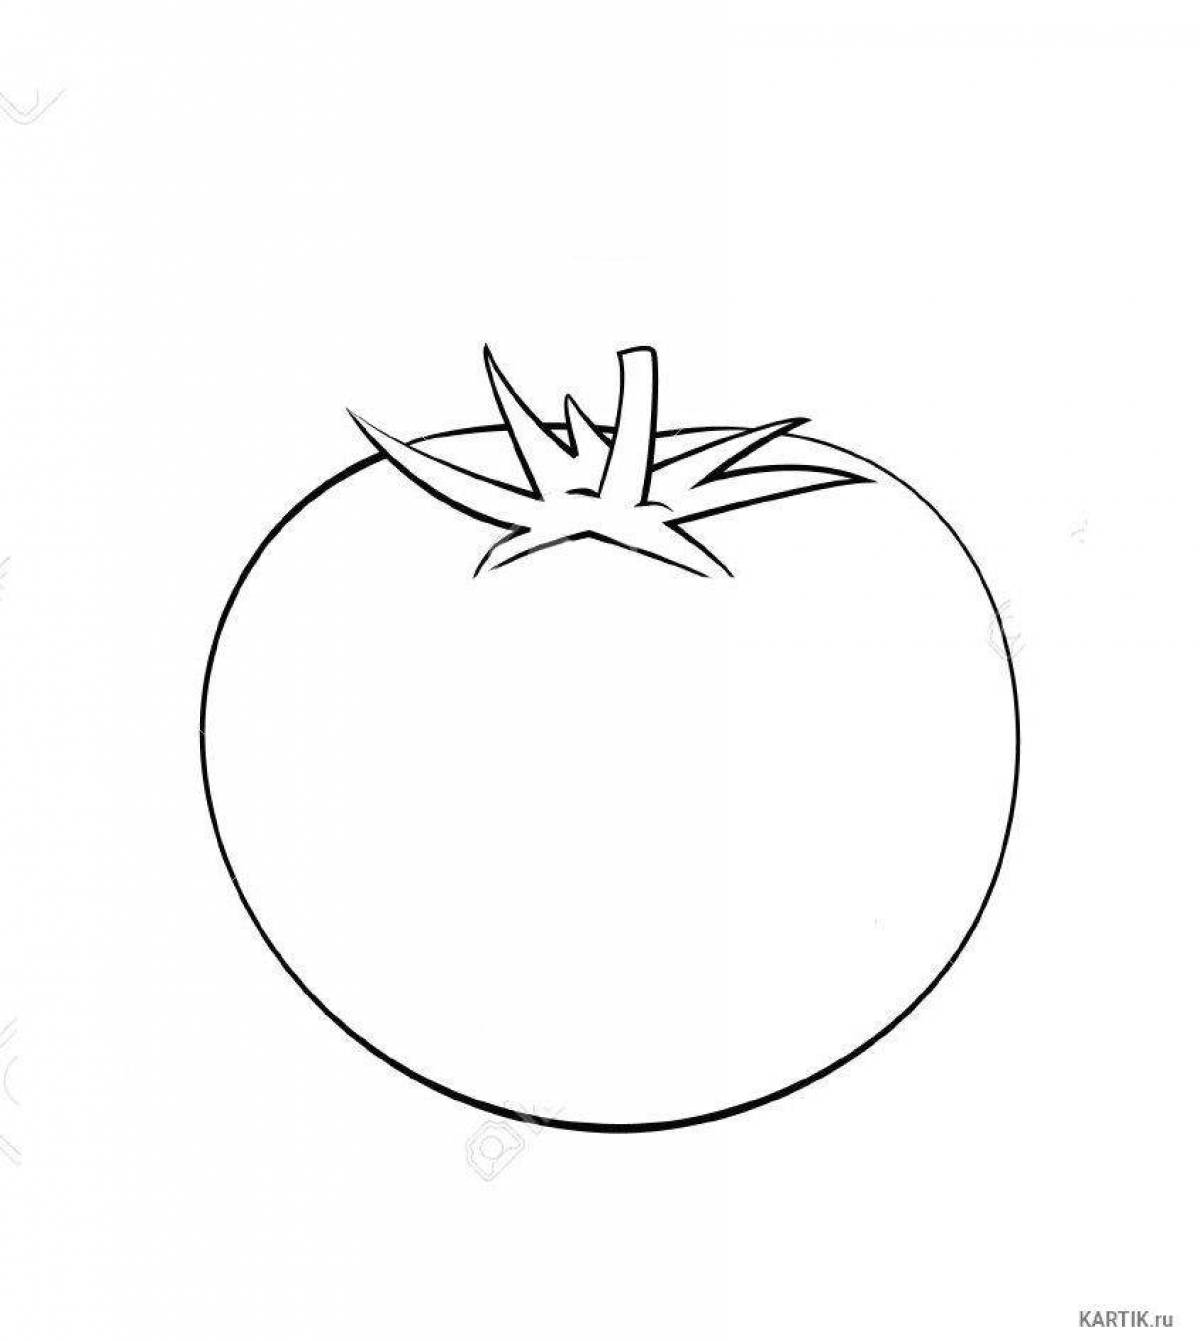 Adorable tomato coloring page for kids